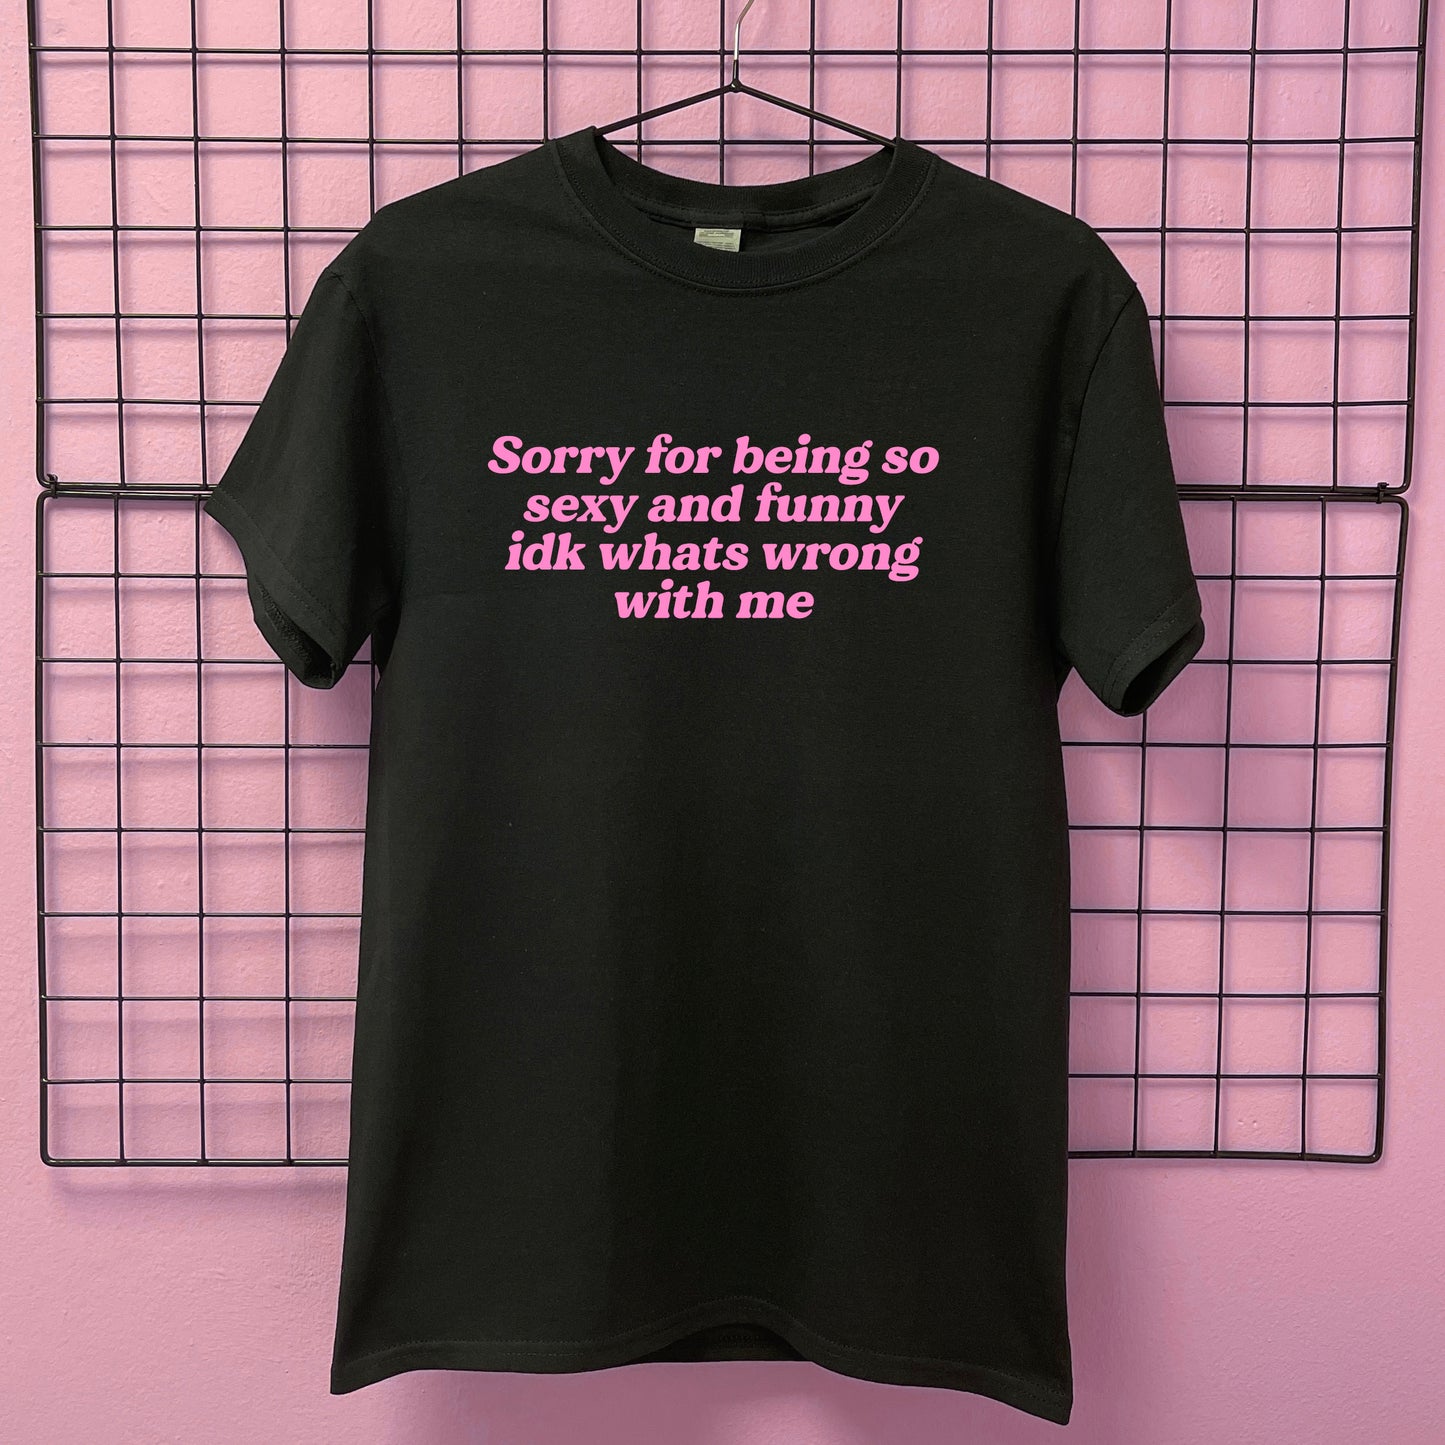 SORRY FOR BEING SO SEXY T-SHIRT